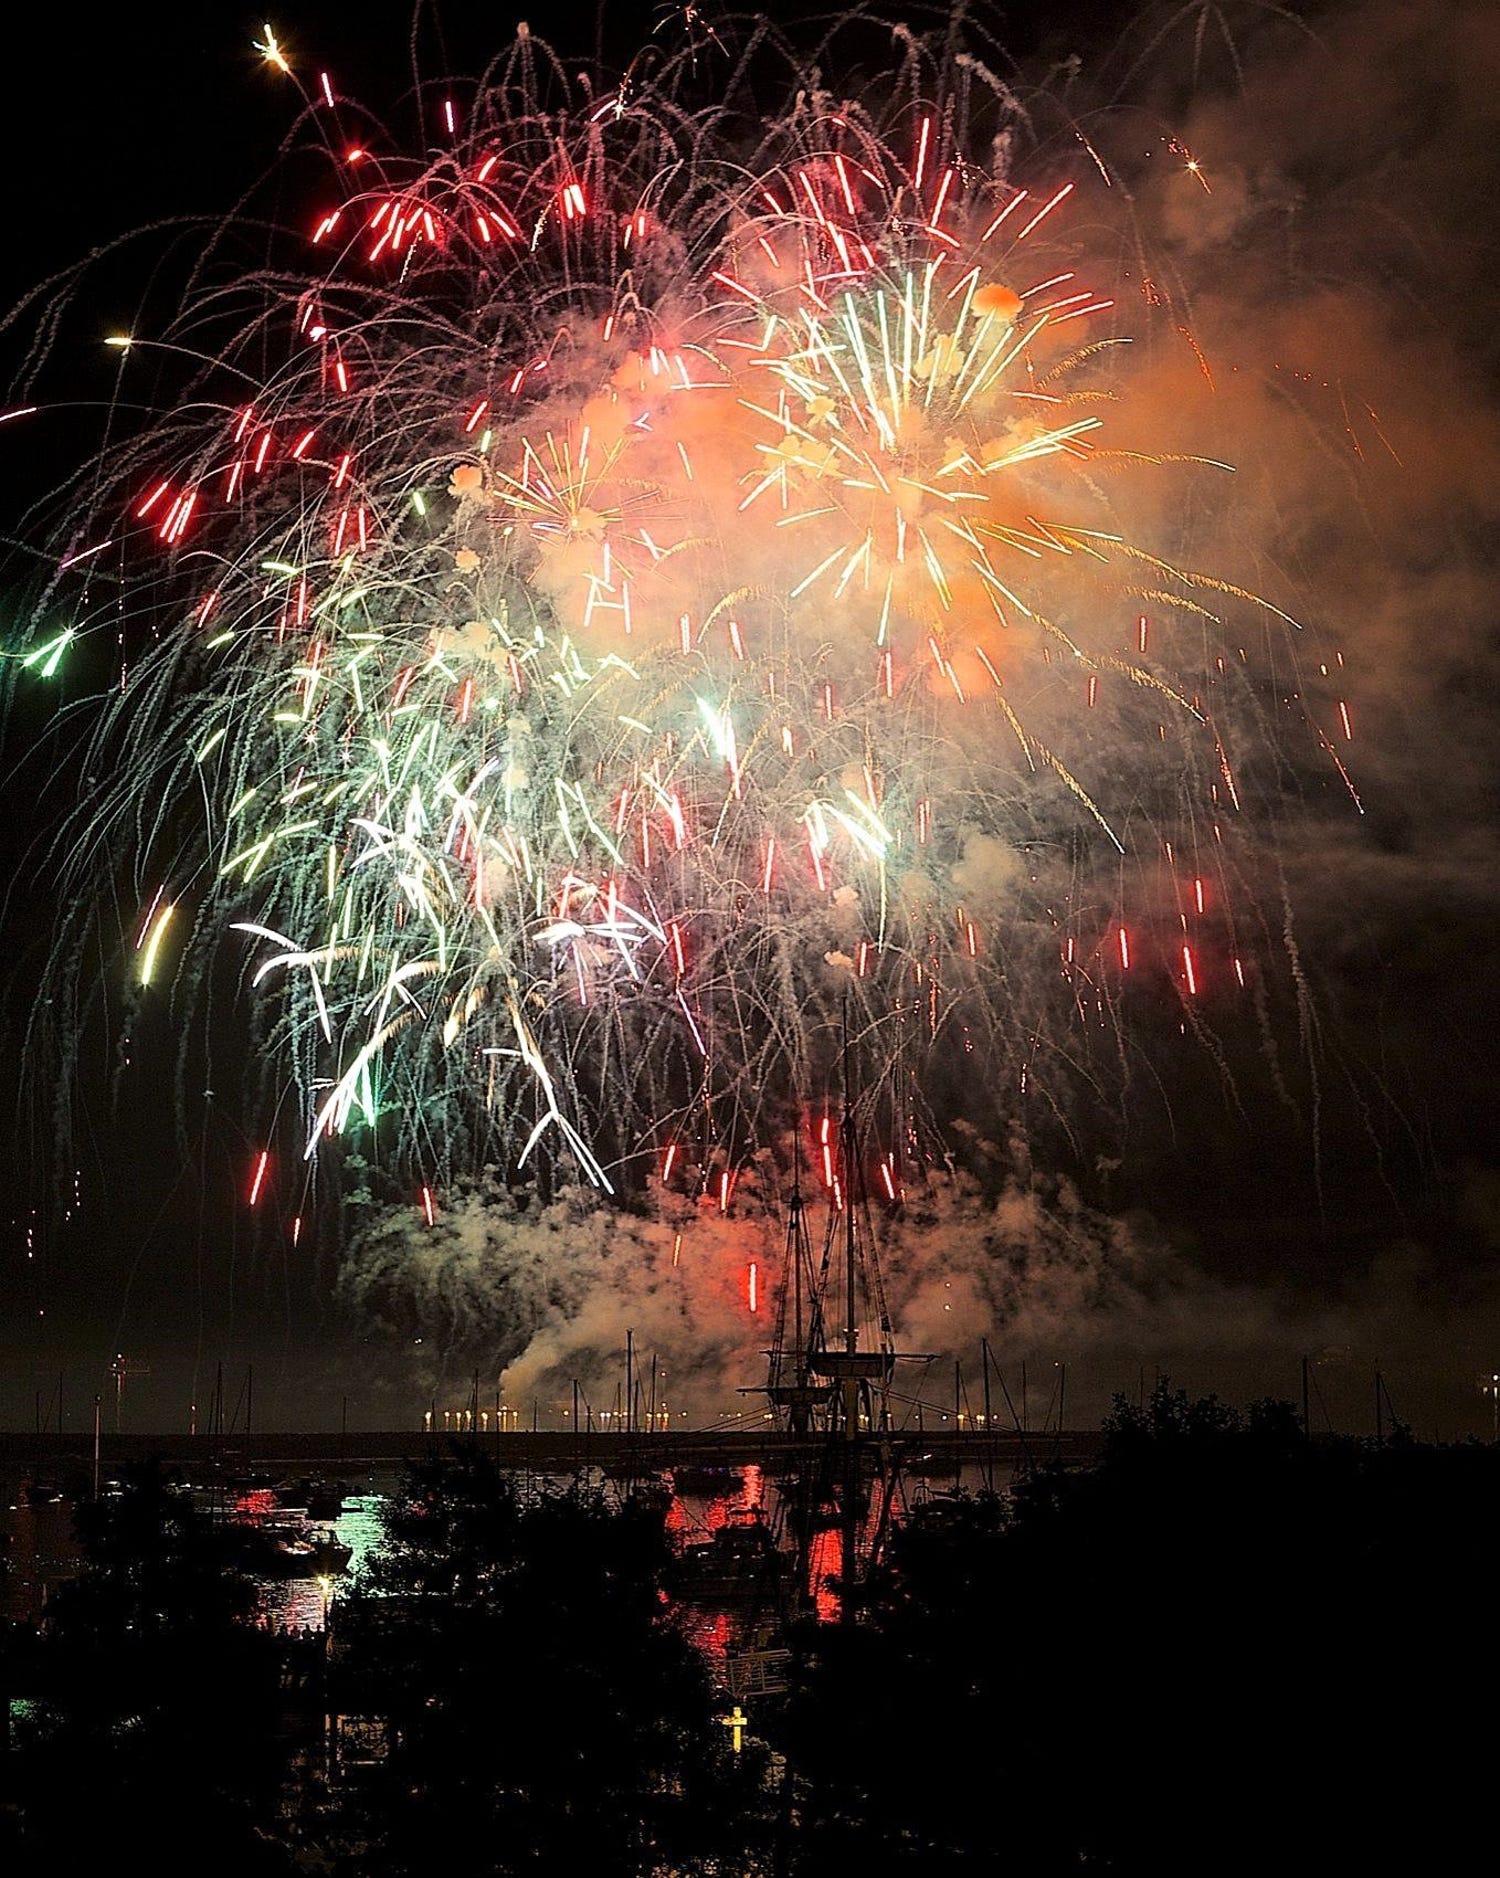 July 4th fireworks in MA, VT, NH, CT, RI, Maine and July 4 trivia quiz